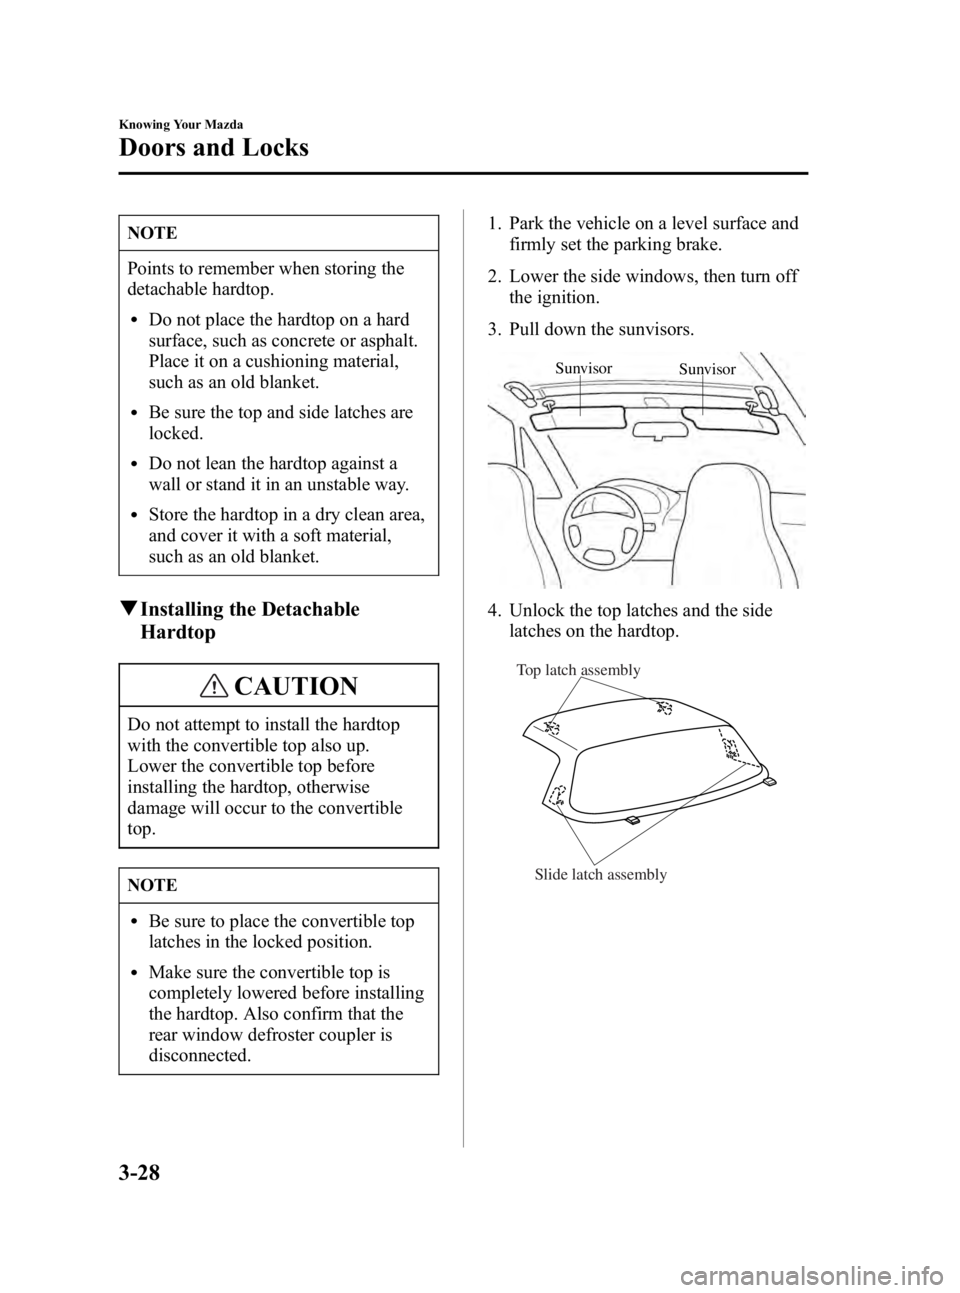 MAZDA MODEL MX-5 MIATA 2005 Repair Manual Black plate (70,1)
NOTE
Points to remember when storing the
detachable hardtop.
lDo not place the hardtop on a hard
surface, such as concrete or asphalt.
Place it on a cushioning material,
such as an 